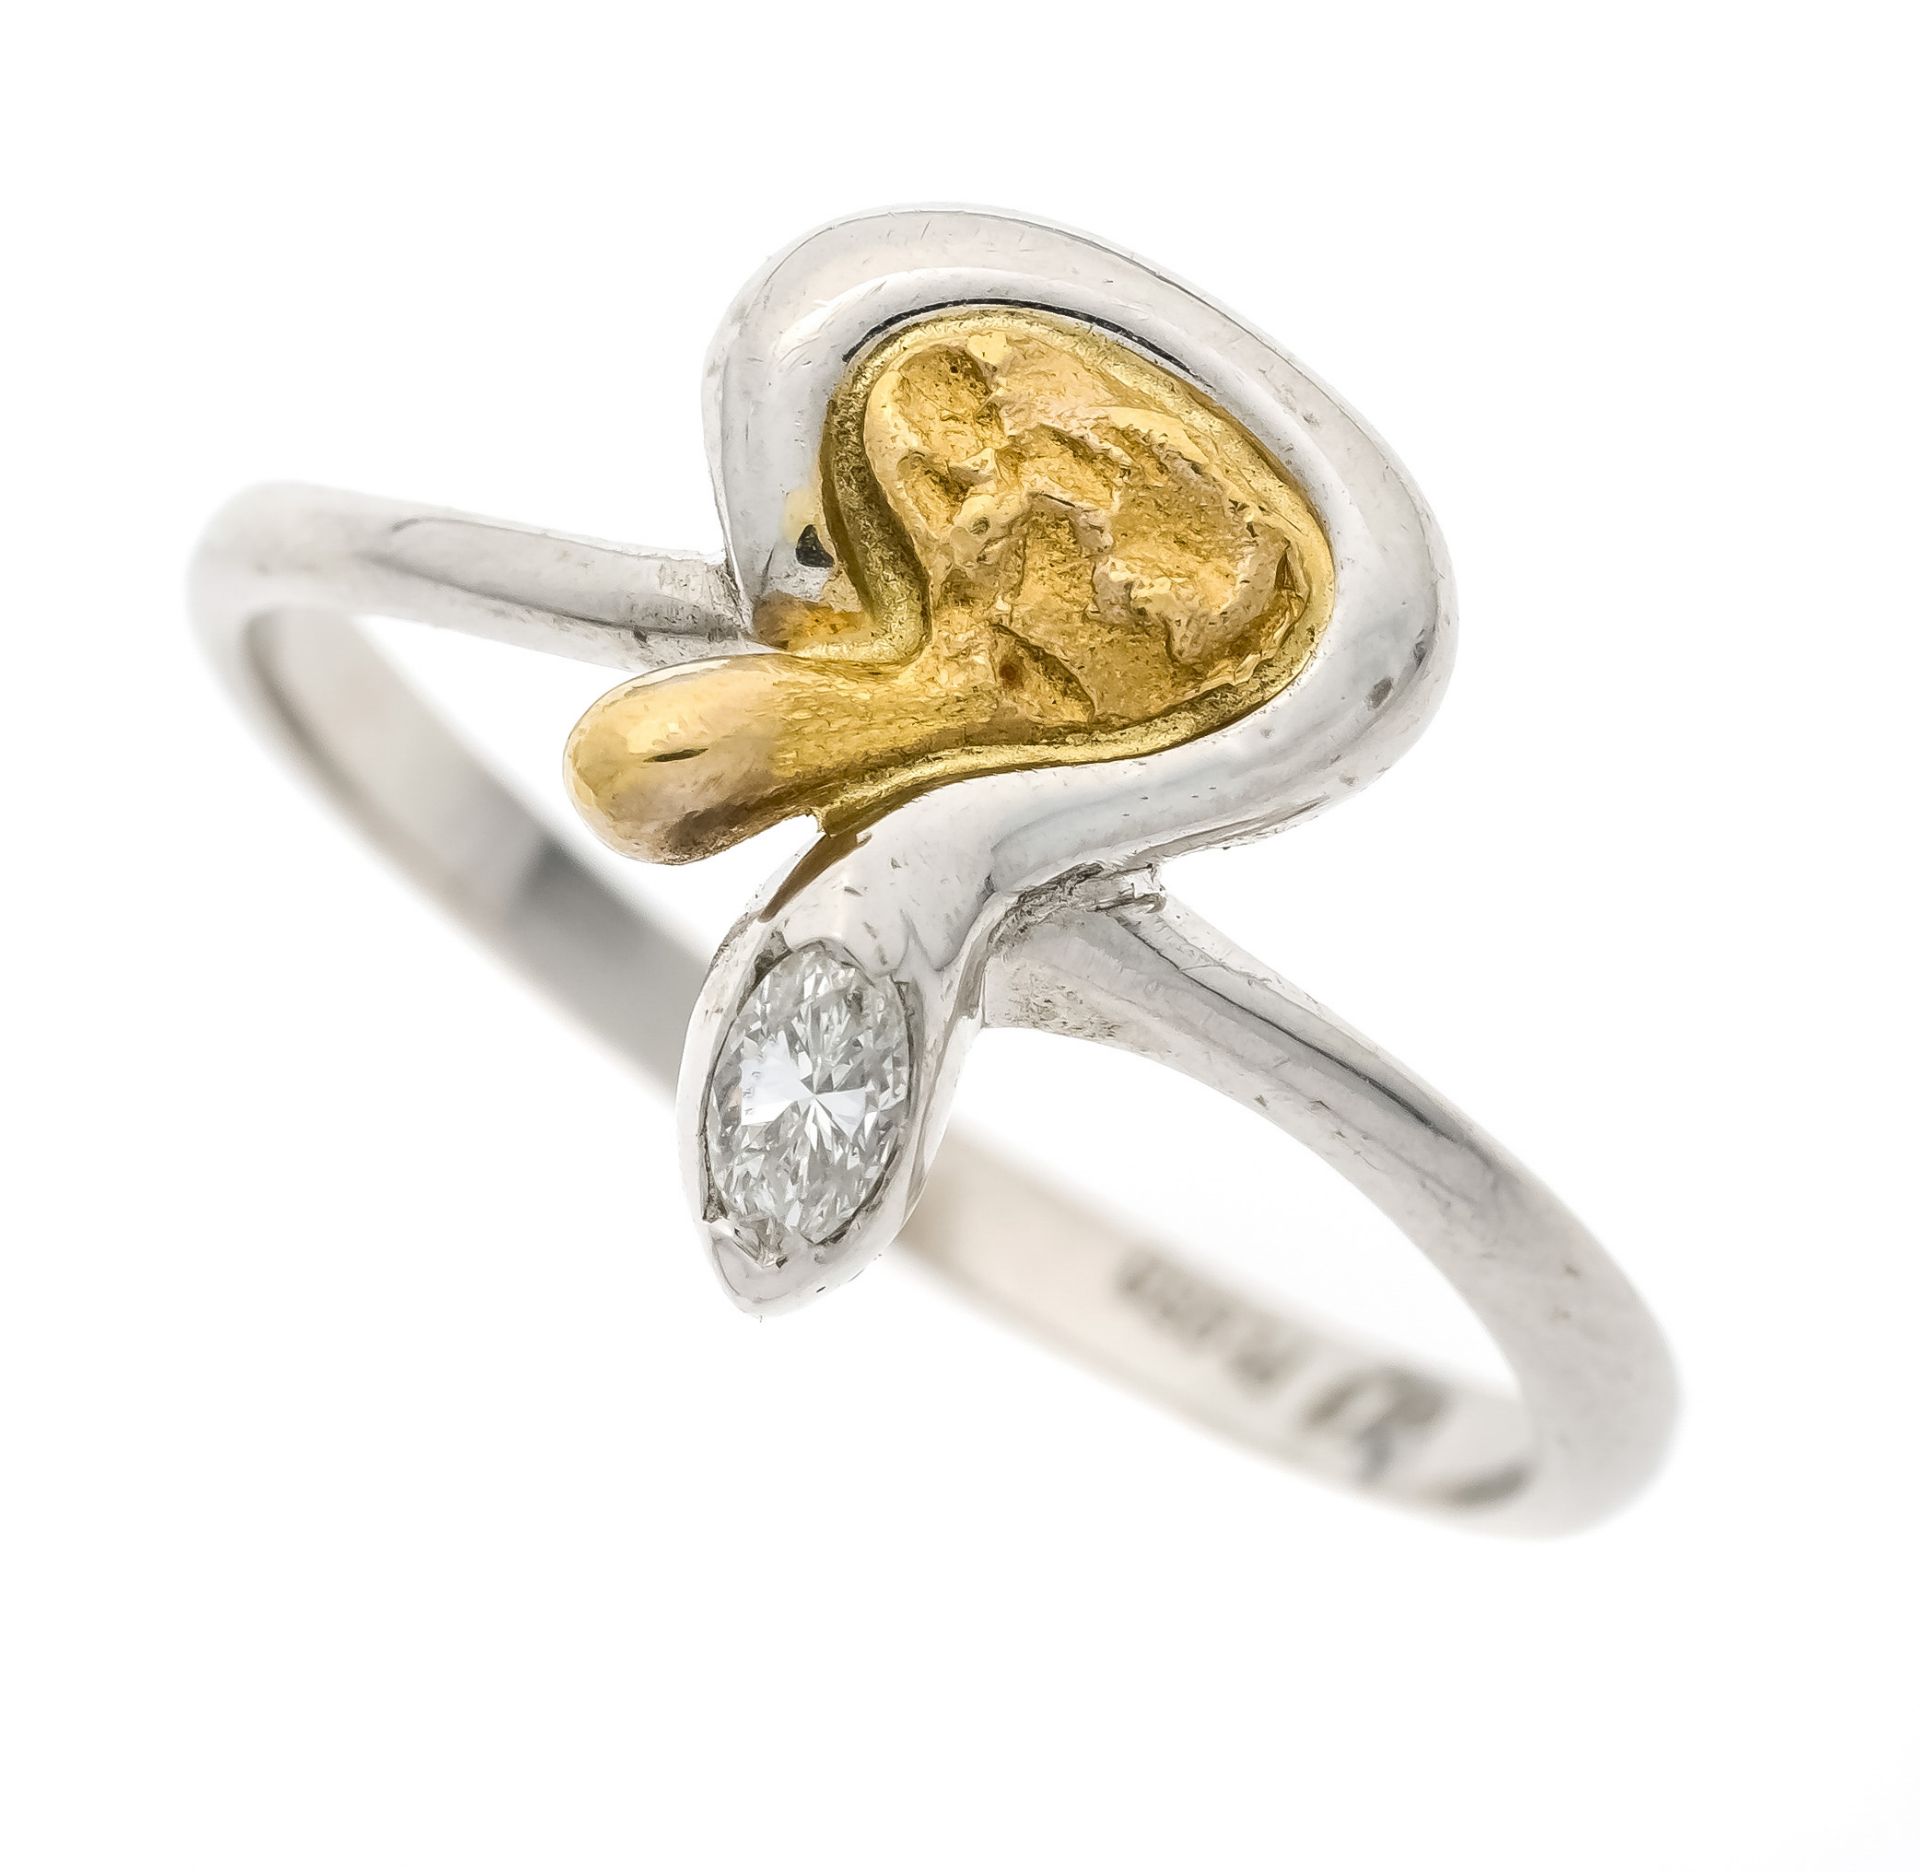 Stylized snake ring platinum 950/000 and yellow gold with a diamond navette 0.06 ct W/VS-SI, RG